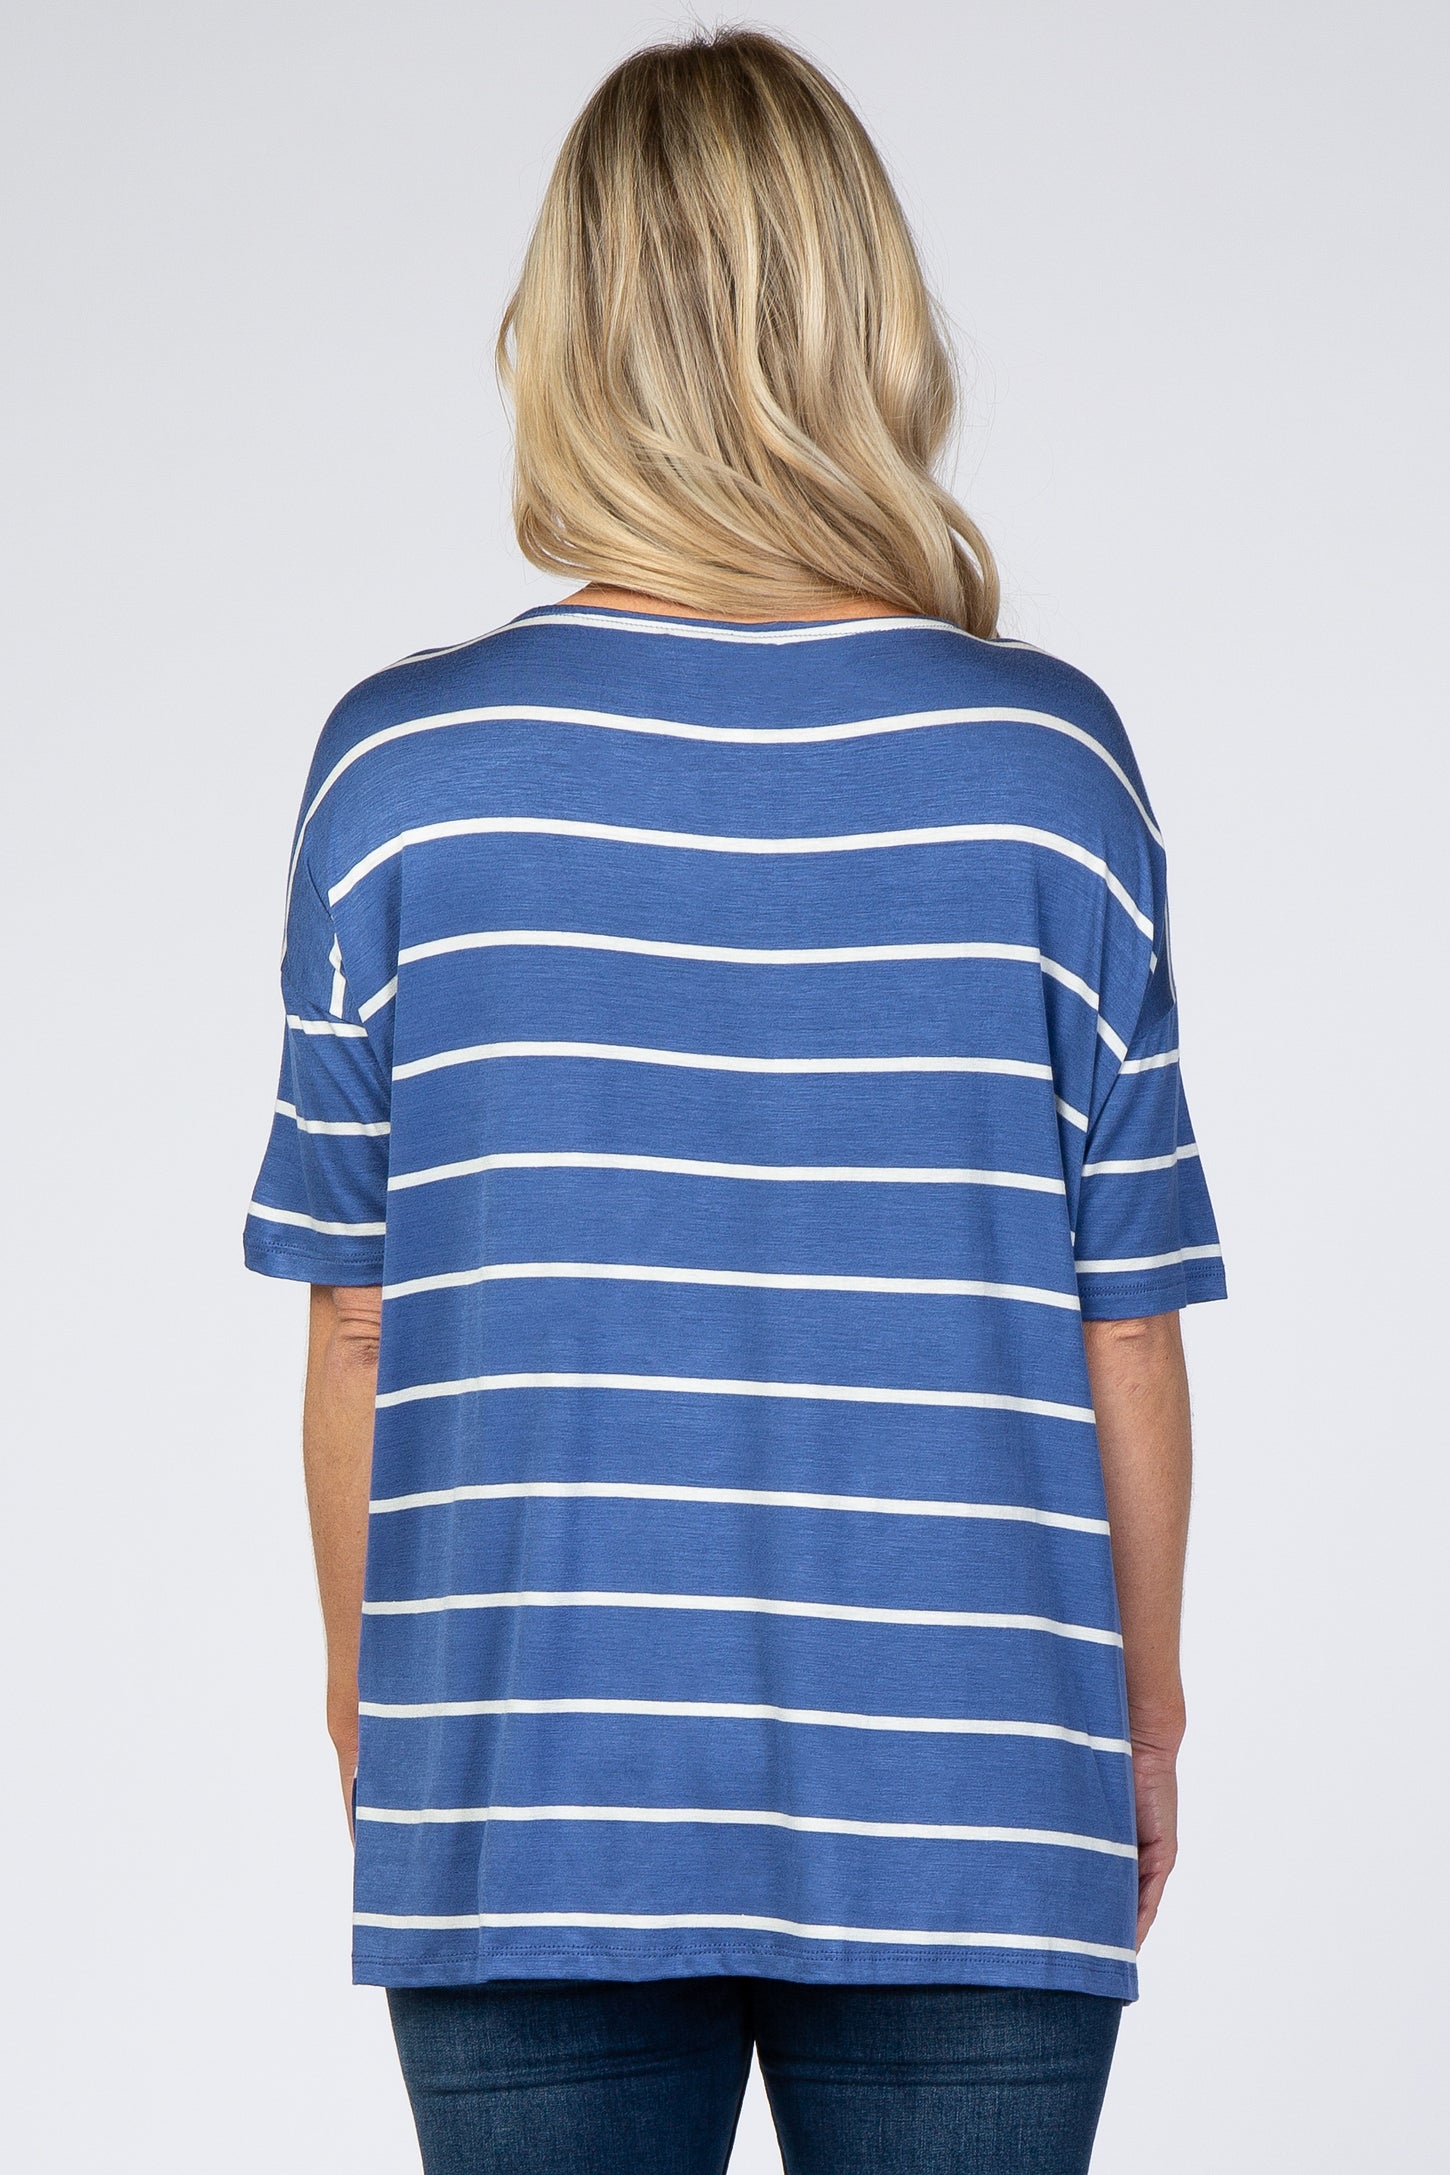 Blue Striped Short Sleeve Maternity Top